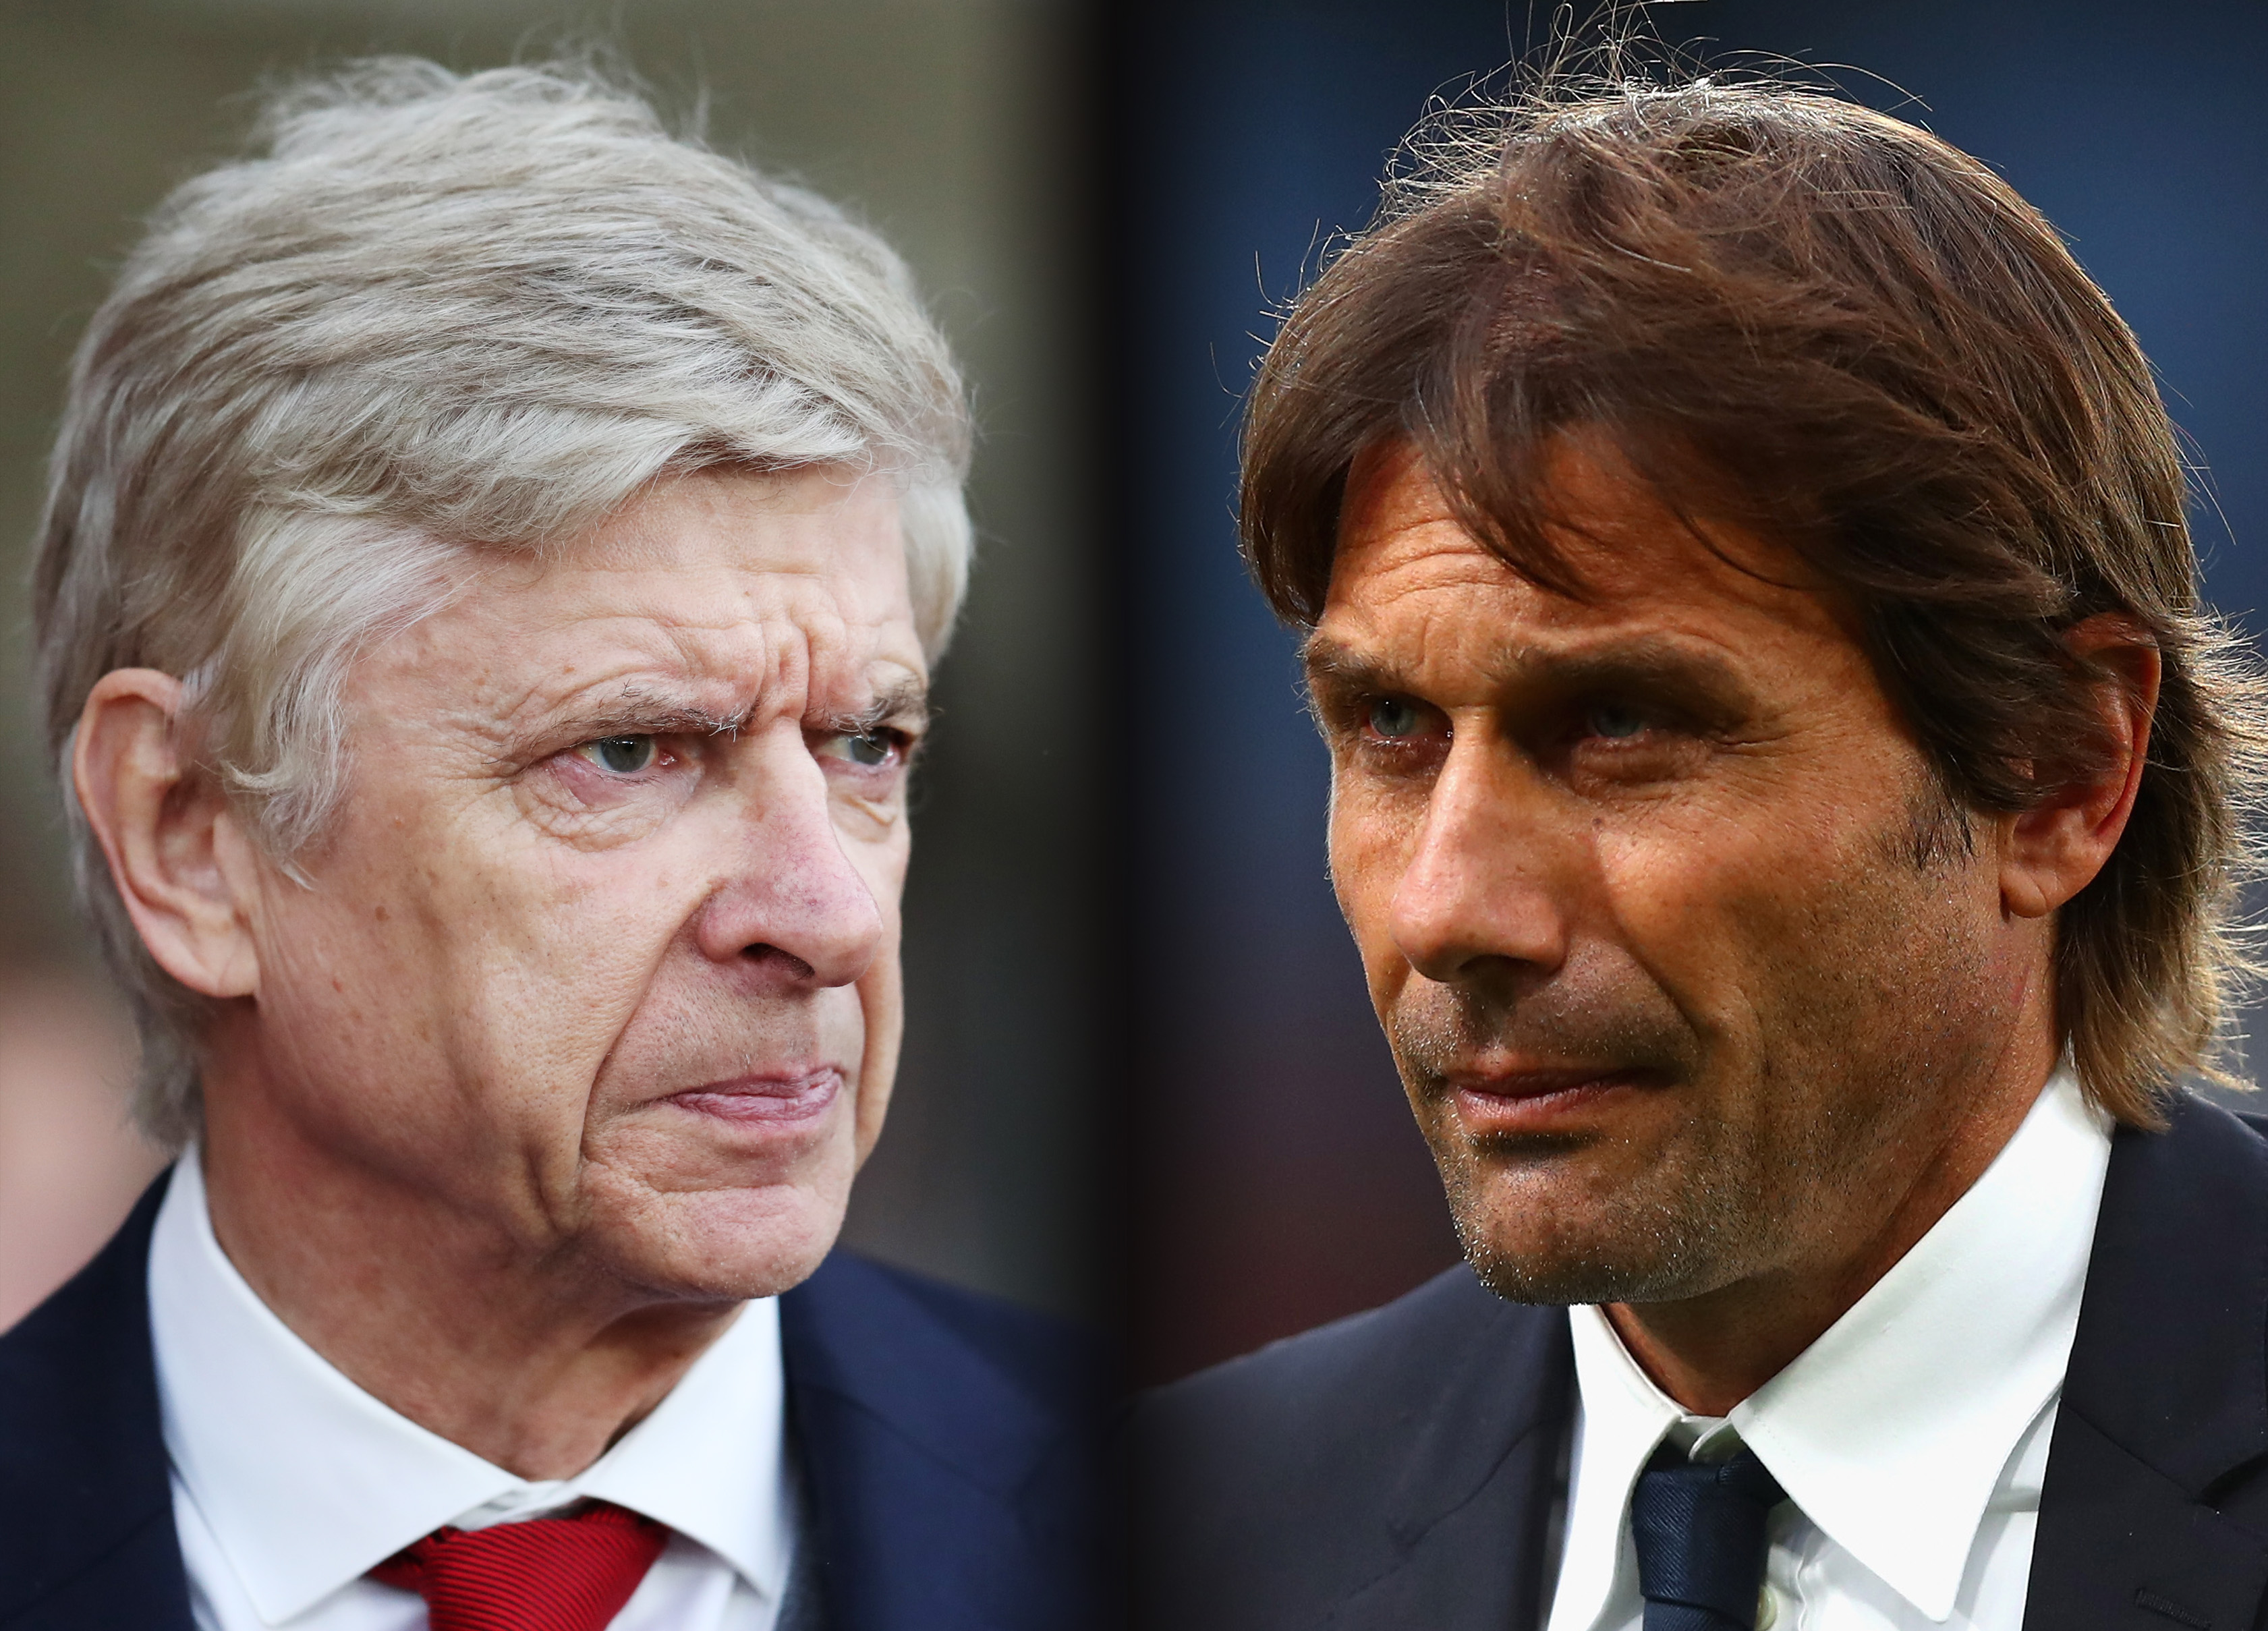 FILE PHOTO (EDITORS NOTE: GRADIENT ADDED - COMPOSITE OF TWO IMAGES - Image numbers (L) 889346808 and 861285074) In this composite image a comparision has been made between Arsene Wenger, Manager of Arsenal (L) and Antonio Conte, Manager of Chelsea.  Arsenal and  Chelsea meet in a Premier League match on January 3, 2017 at the Emirates Stadium in London,England.    ***LEFT IMAGE*** SOUTHAMPTON, ENGLAND - DECEMBER 10: Arsene Wenger, Manager of Arsenal looks on during the Premier League match between Southampton and Arsenal at St Mary's Stadium on December 10, 2017 in Southampton, England. (Photo by Catherine Ivill/Getty Images) ***RIGHT IMAGE*** LONDON, ENGLAND - OCTOBER 14: Antonio Conte, Manager of Chelsea looks dejected after the Premier League match between Crystal Palace and Chelsea at Selhurst Park on October 14, 2017 in London, England. (Photo by Clive Rose/Getty Images)